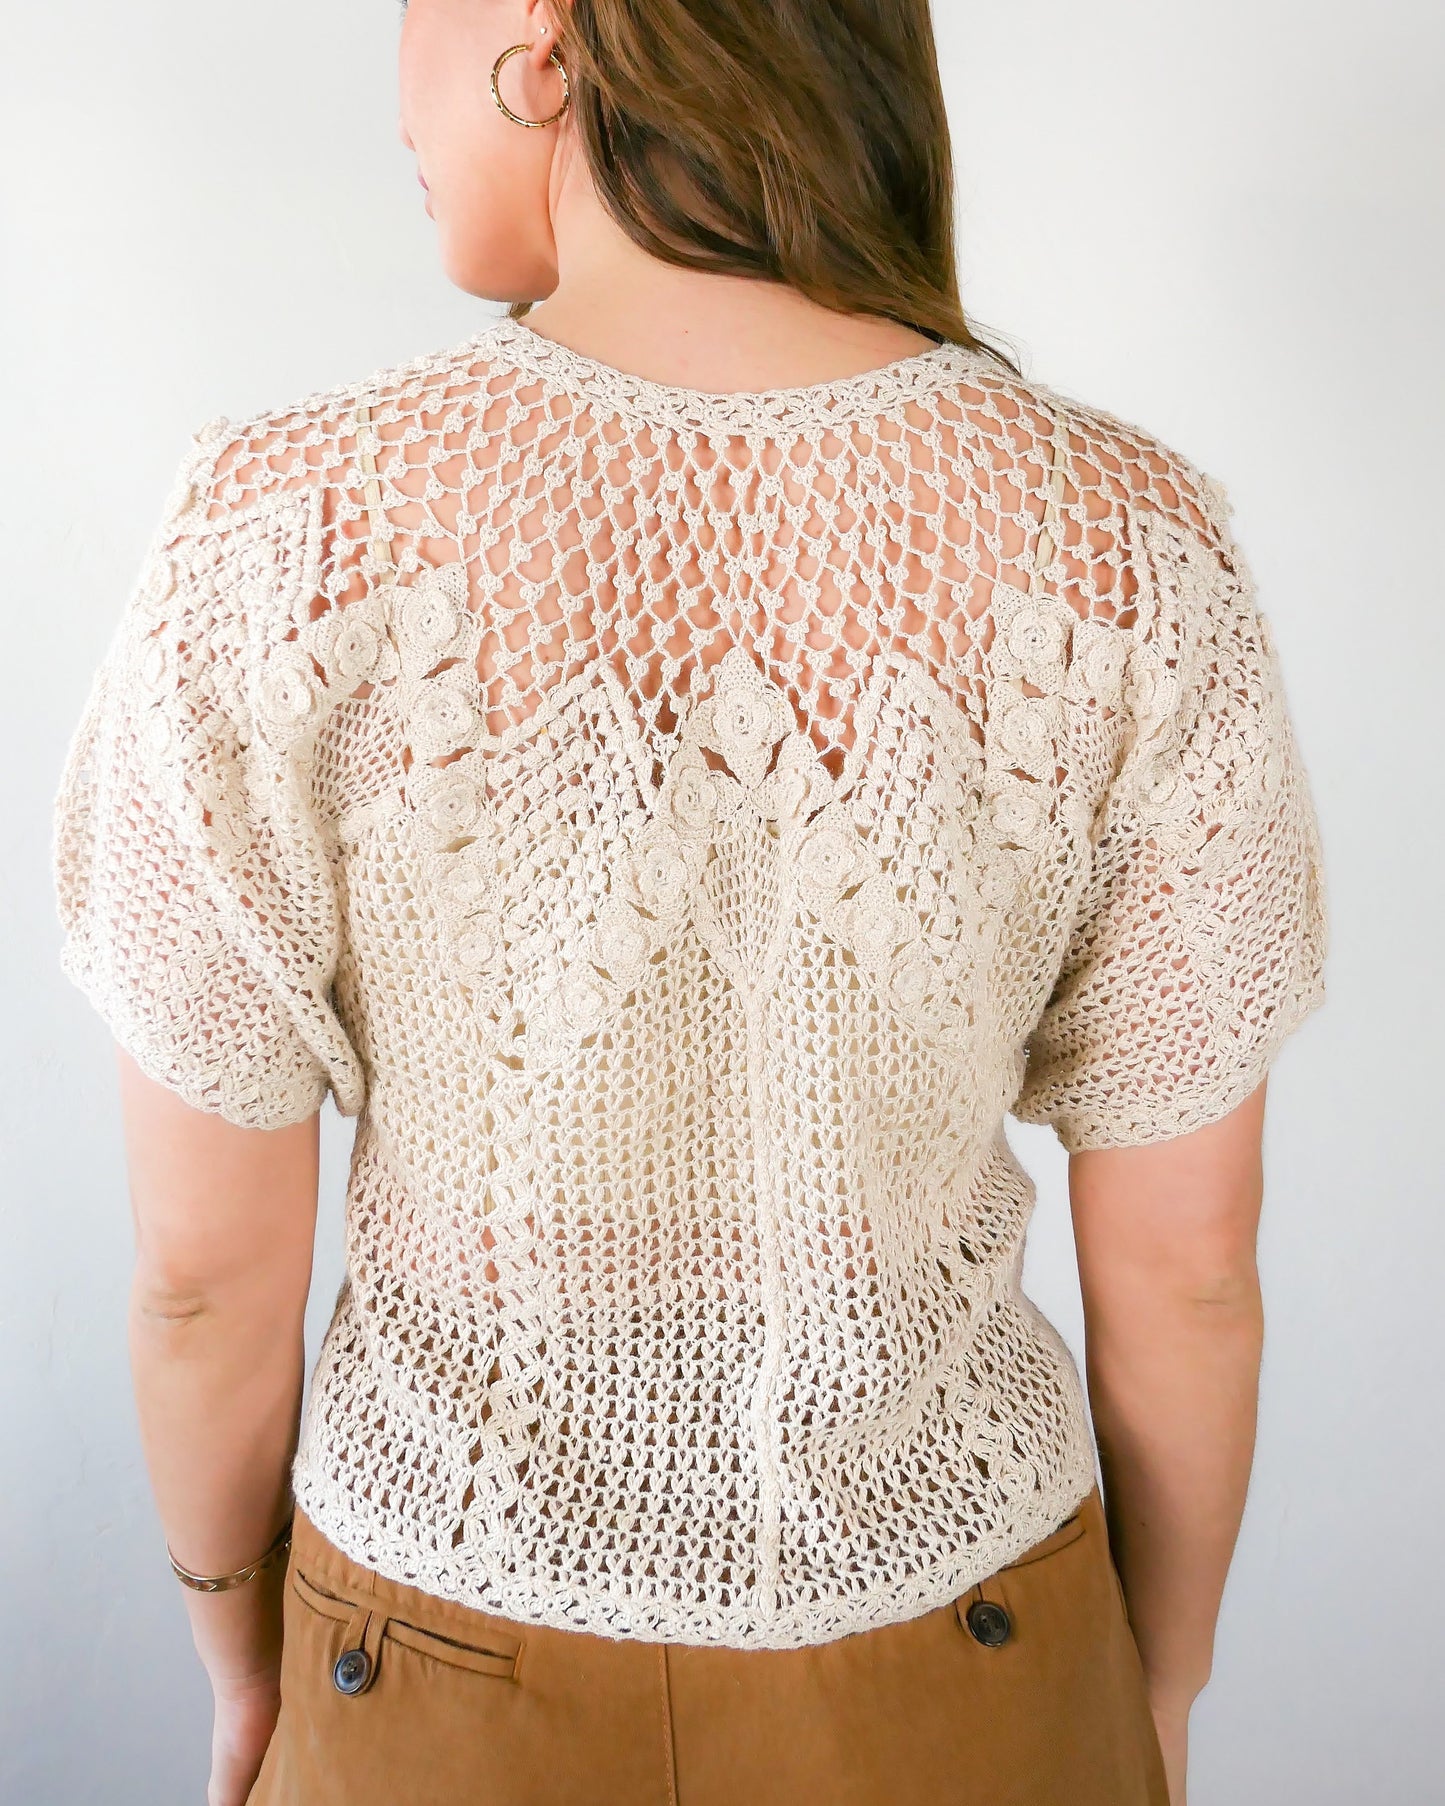 View of back of top with no buttons. A classic Lim's Vintage hand crocheted button down top with a beautiful zig zag pattern on both the front and back, with lighter stitching around the chest and shoulders to bring a sense of lightness and space to the neckline. Petite flower buds sprout up from and accent the edges of the zig zag. This natural color top is versatile, comfortable, and adds a beautiful vintage accent to your wardrobe.